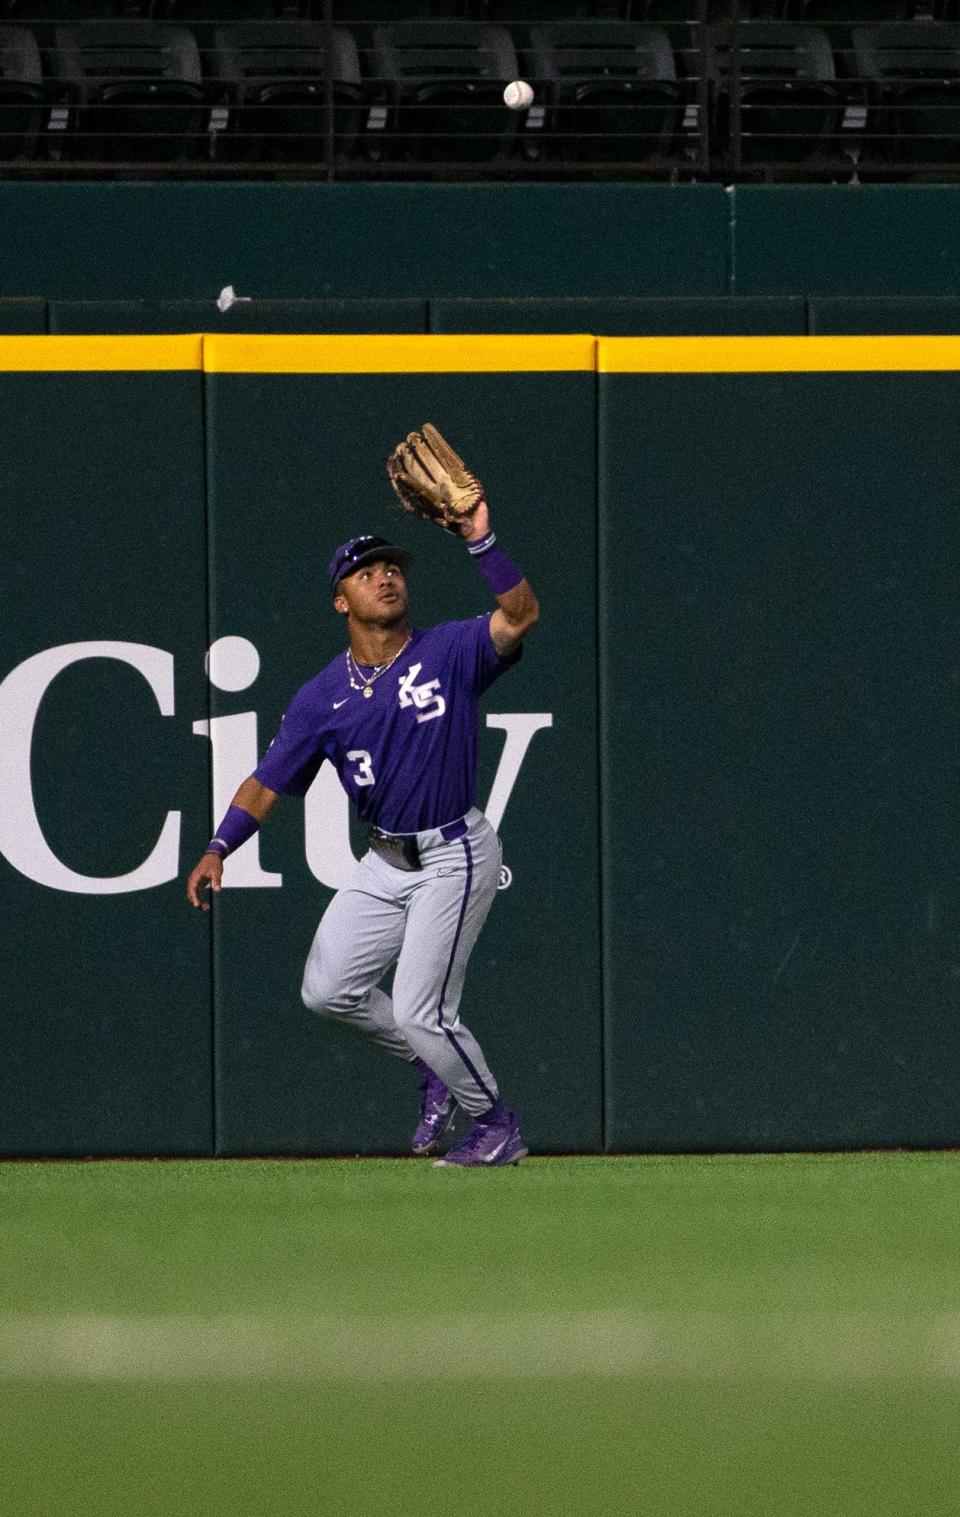 Kansas State's Dom Johnson (3) prepares to catch the ball against Texas Tech in an elimination game of the Big 12 baseball tournament, Friday, May 27, 2022, at Globe Life Field in Arlington.  Kansas State won, 6-5, in 11 innings.